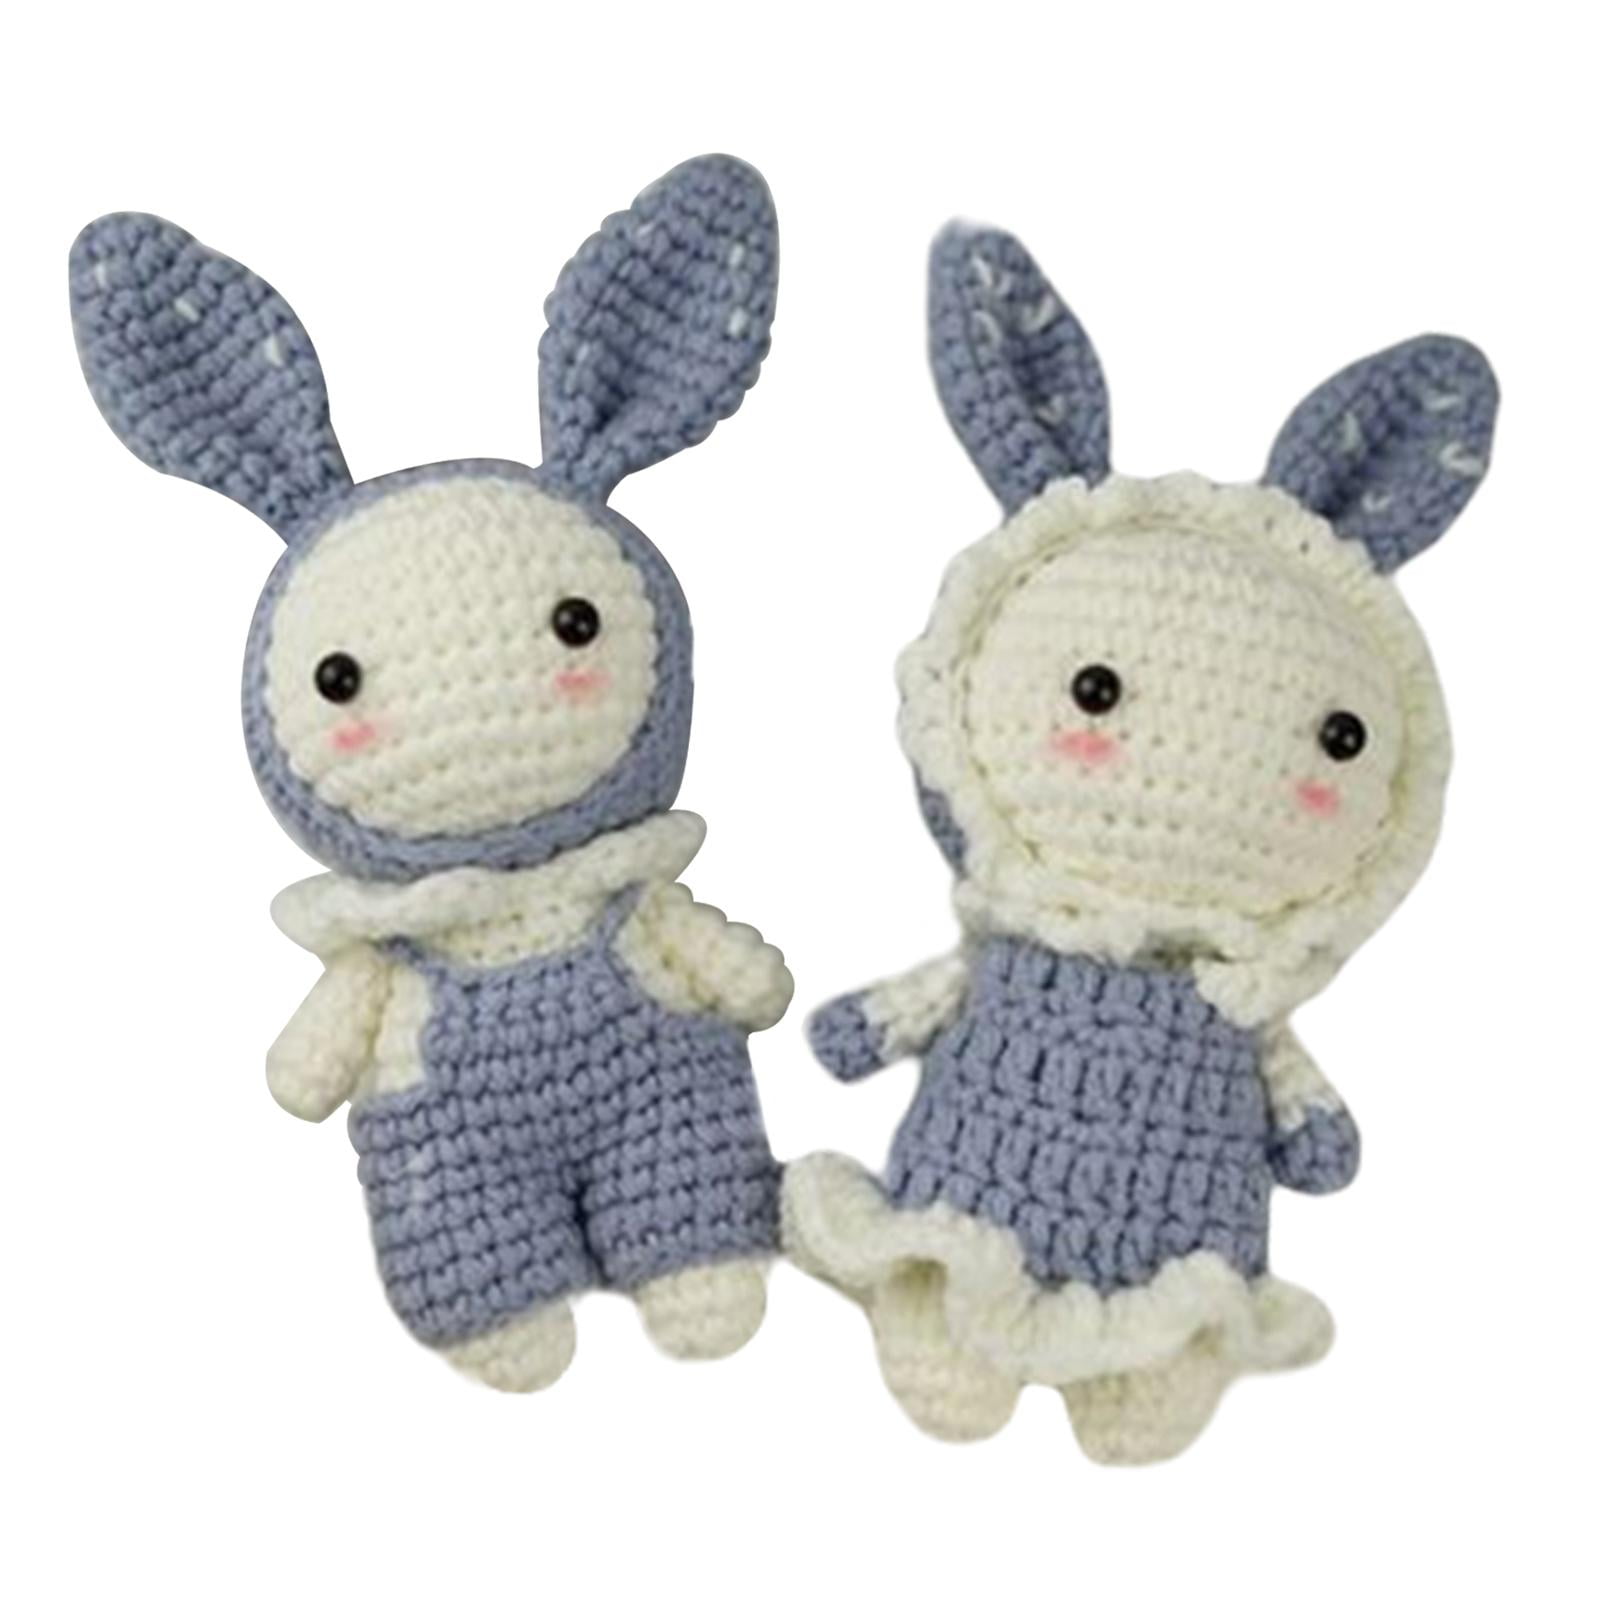 Rabbit And Tulip Crochet Kit For Beginners, Amigurumi Stuffed Animals -  Gift Animal Crochet Starter Kit All-In-One Complete Crochet Kit Learn To  Crochet Sets With Instructions And Step By Step Video Tutorials